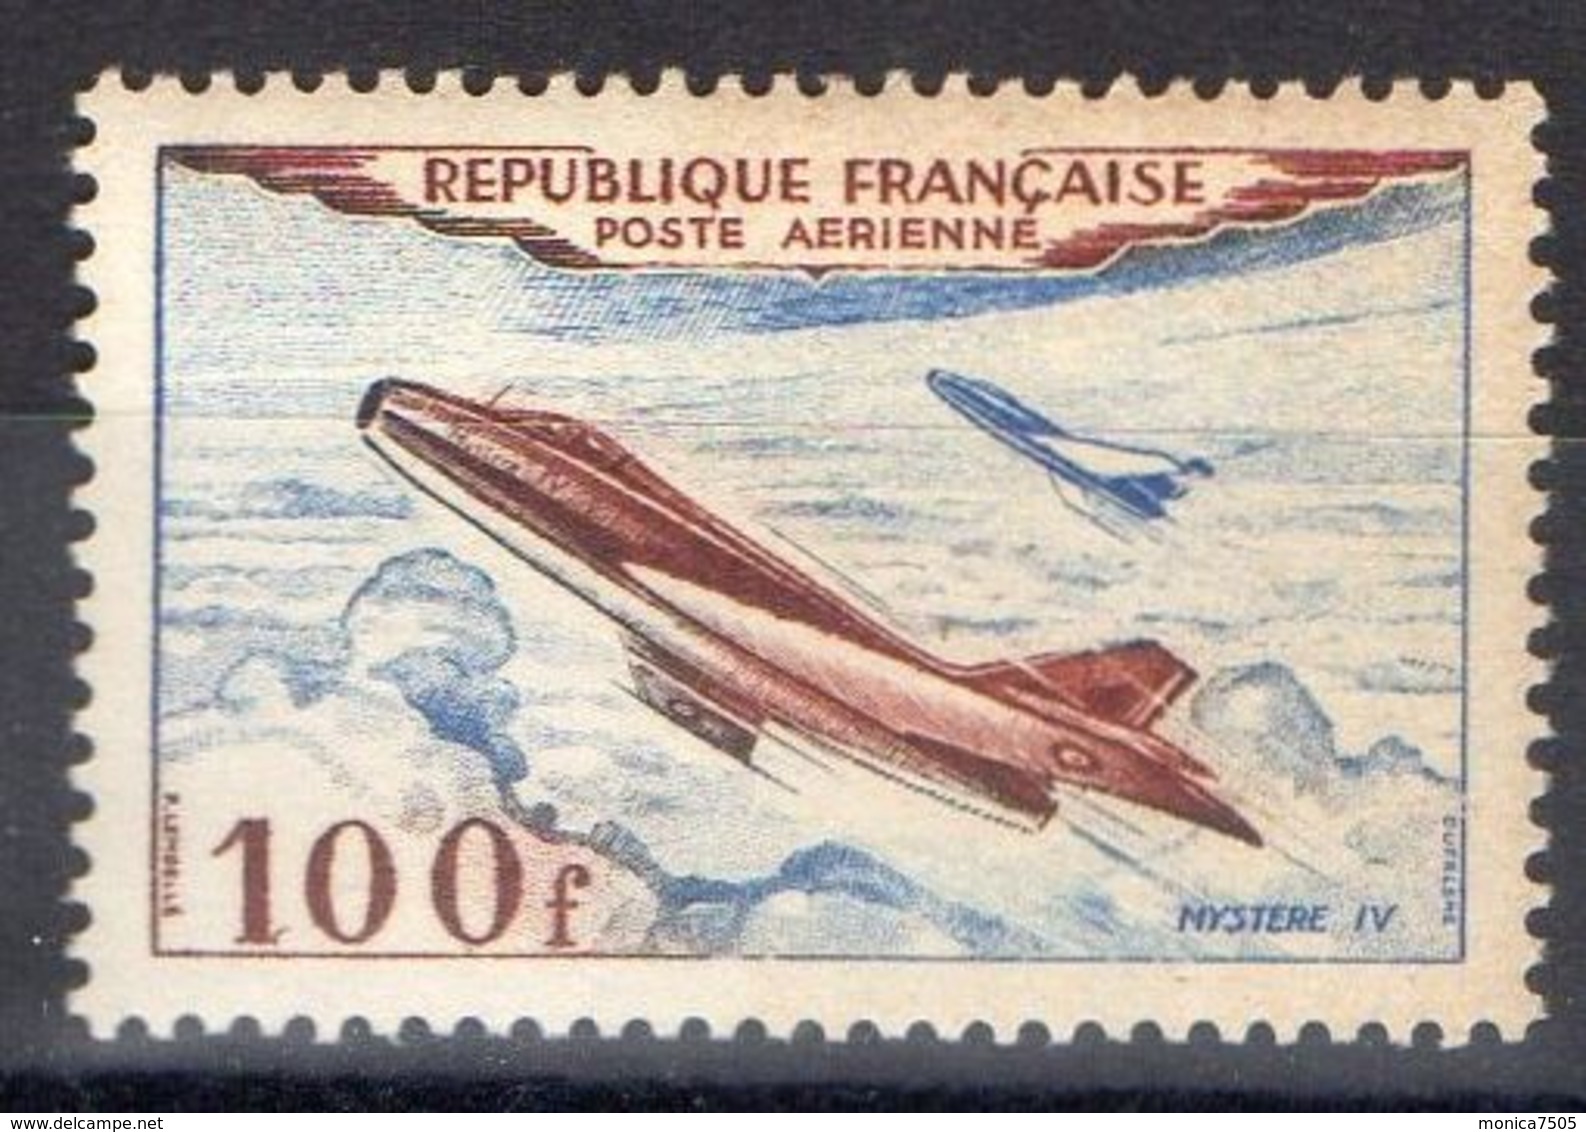 FRANCE ( AERIEN ) : Y&T  N°  30   TIMBRE  NEUF  SANS  TRACE  DE  CHARNIERE . - 1927-1959 Mint/hinged